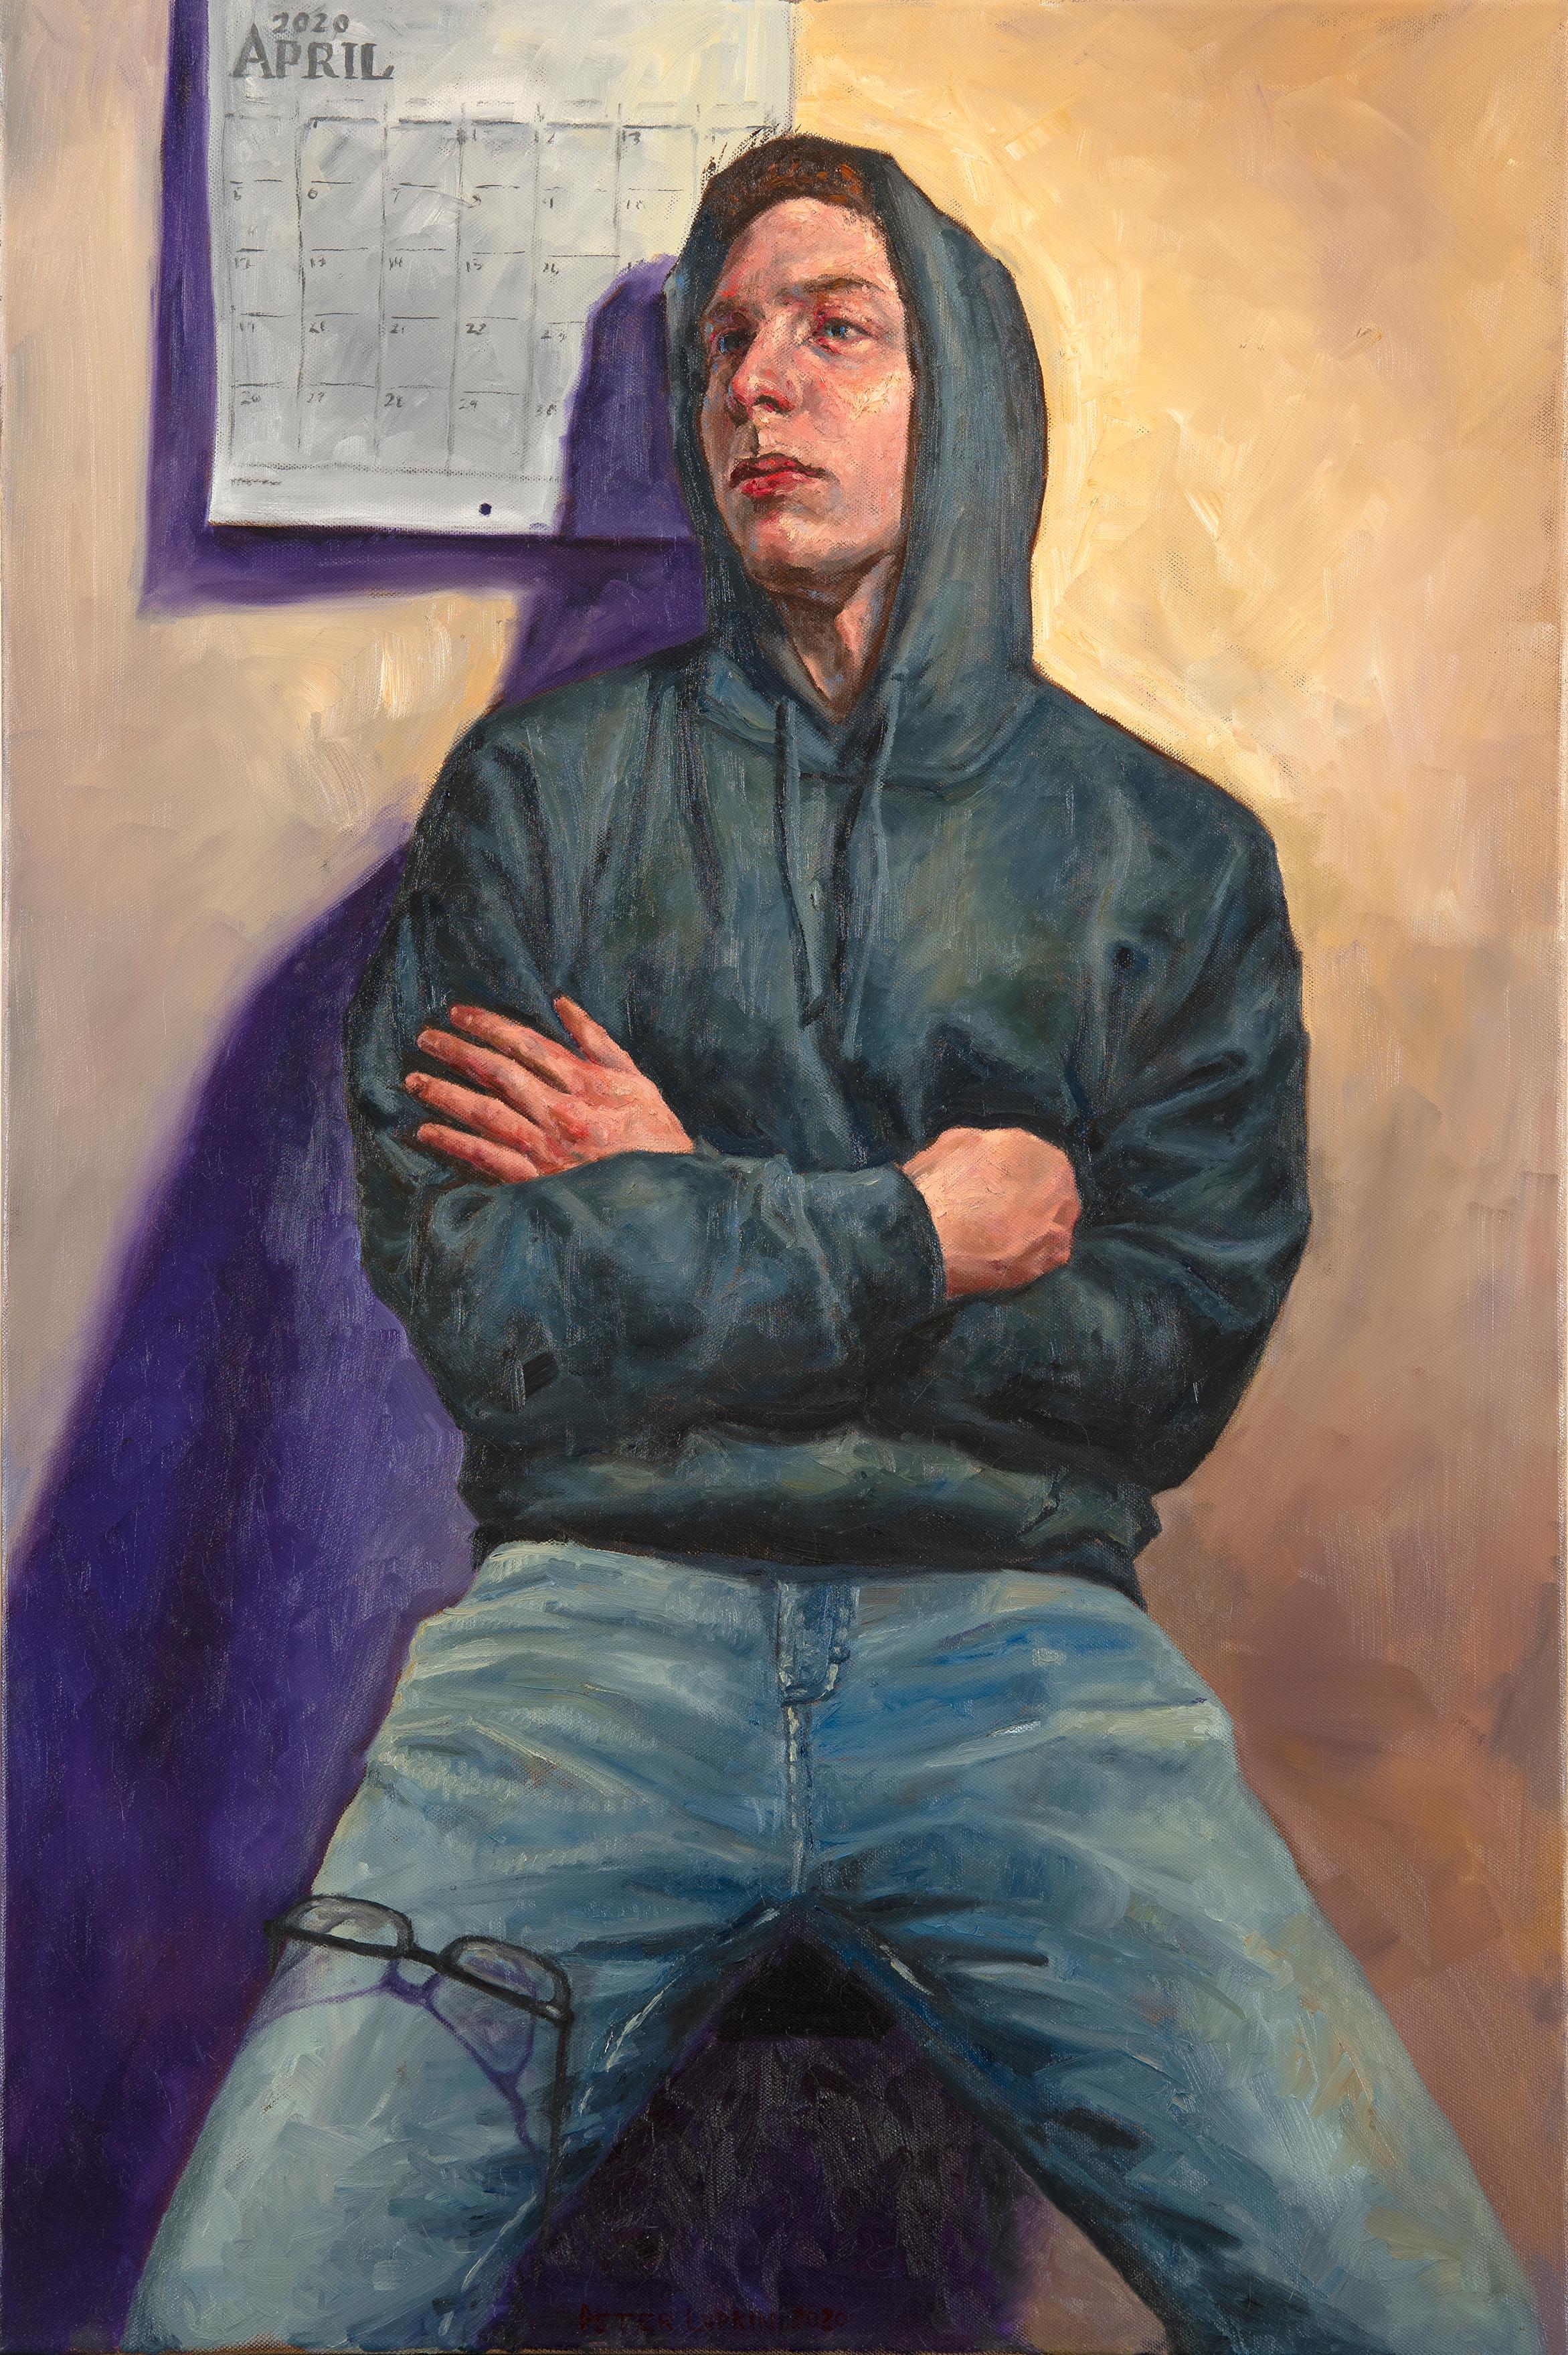 Portrait of William, April, 2020, Seated Male Wearing Gray Hoodie, Original Oil